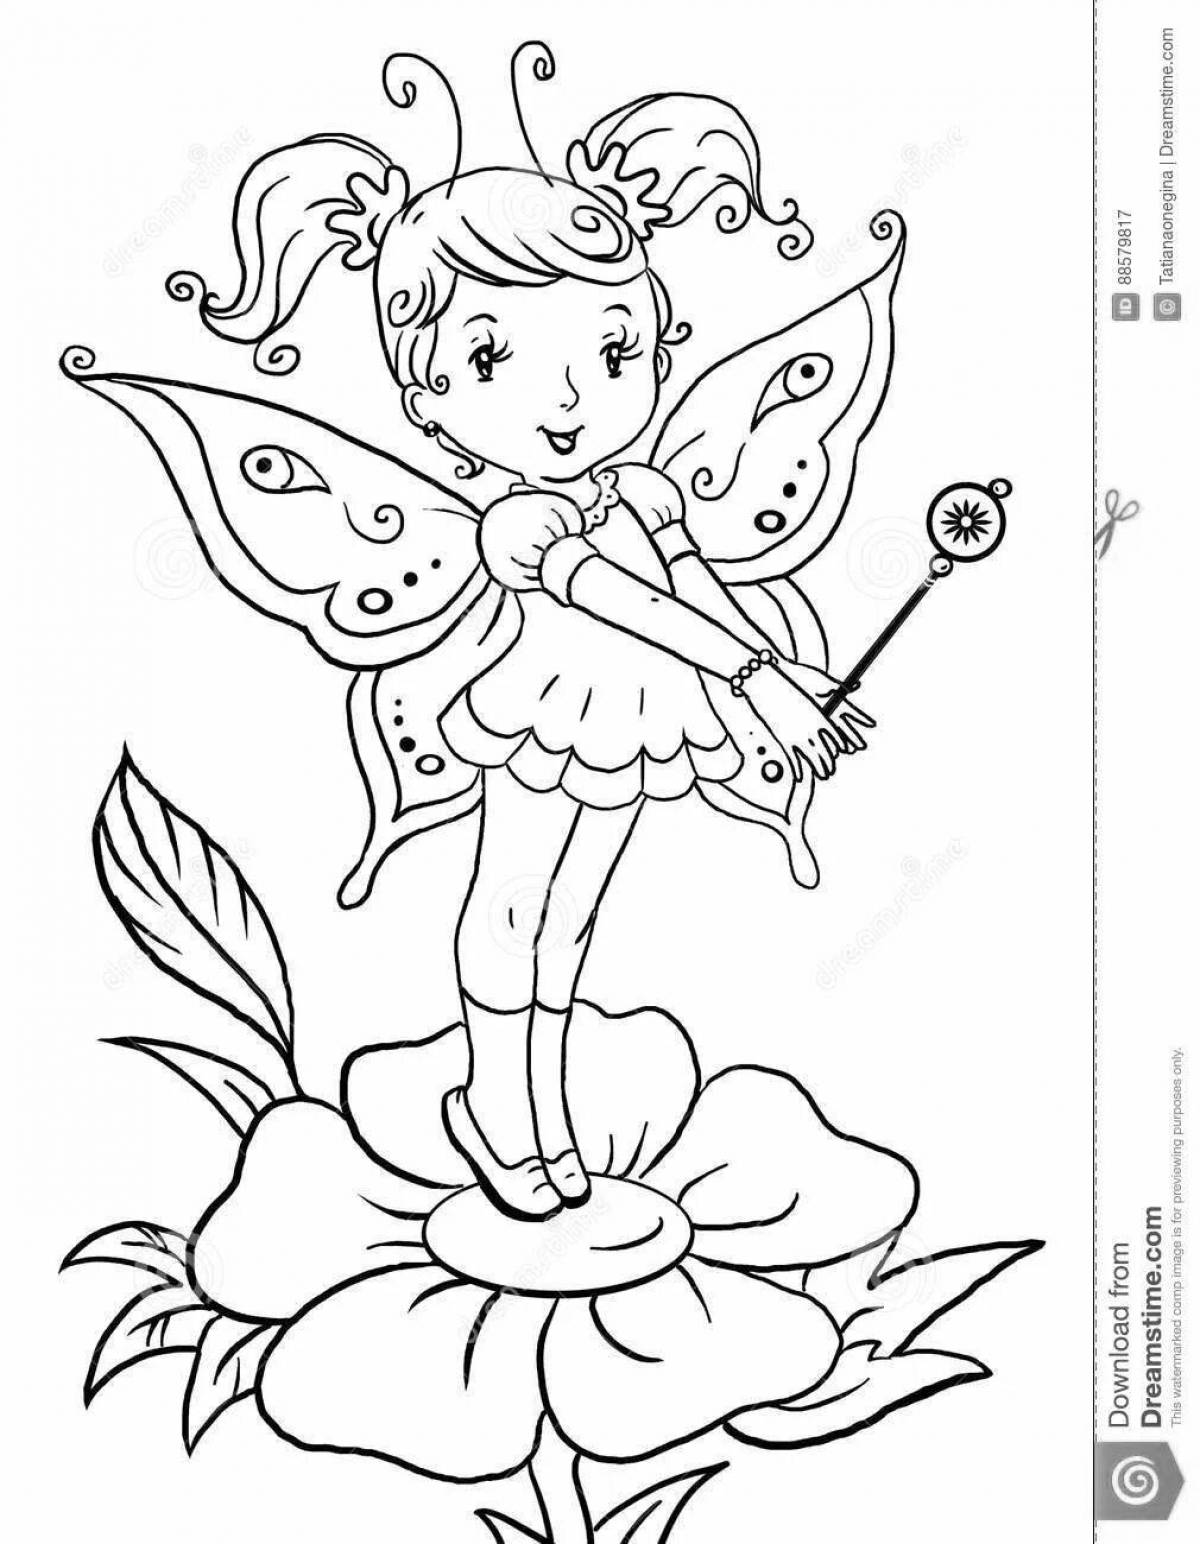 Dazzling flower fairy coloring book